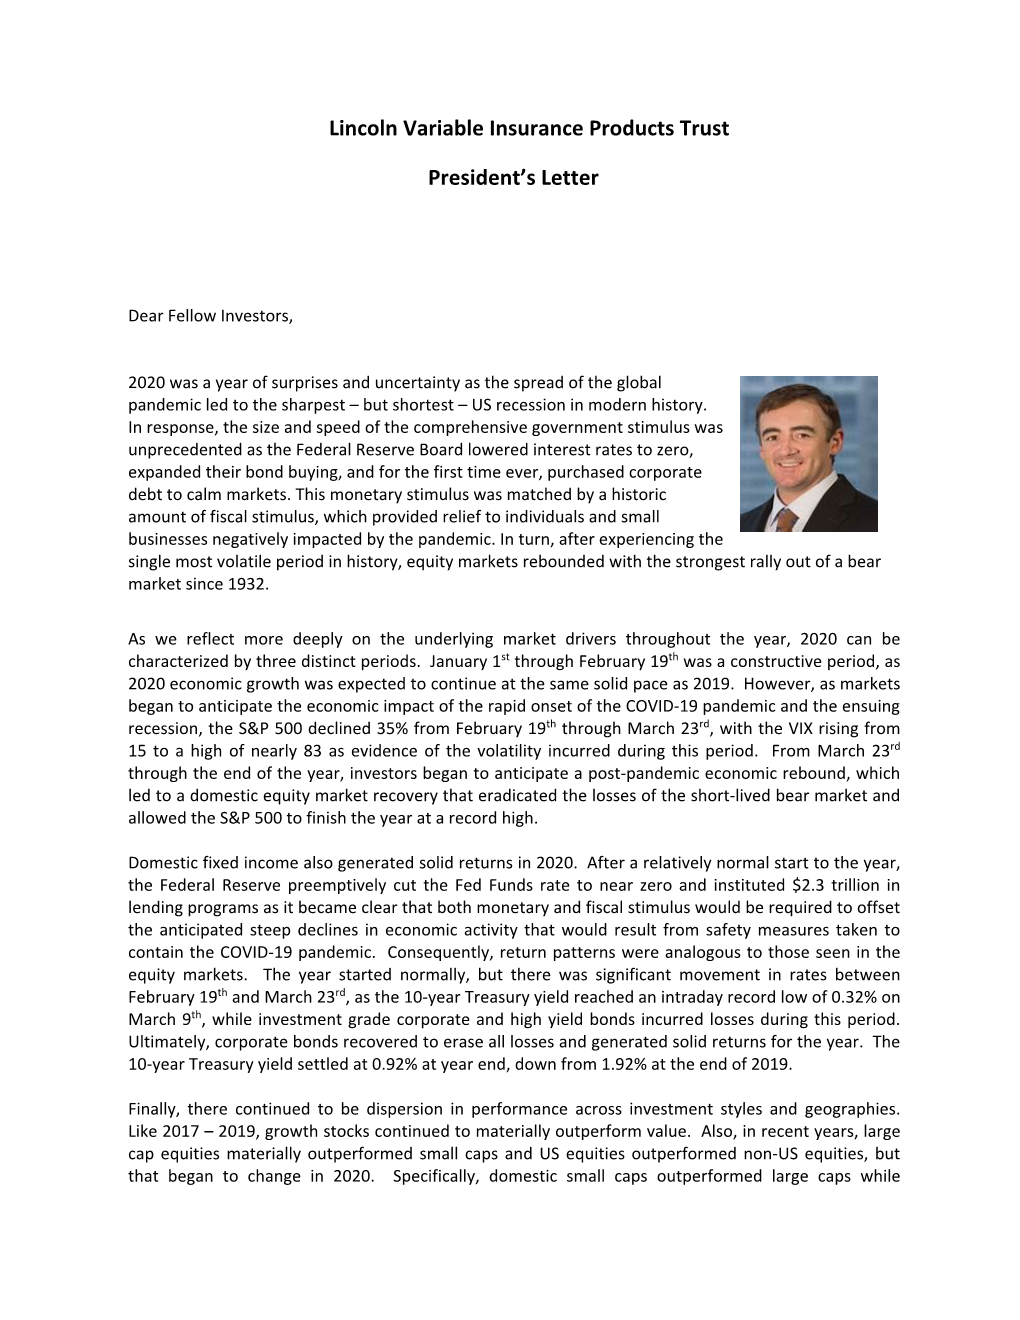 Lincoln Variable Insurance Products Trust President's Letter